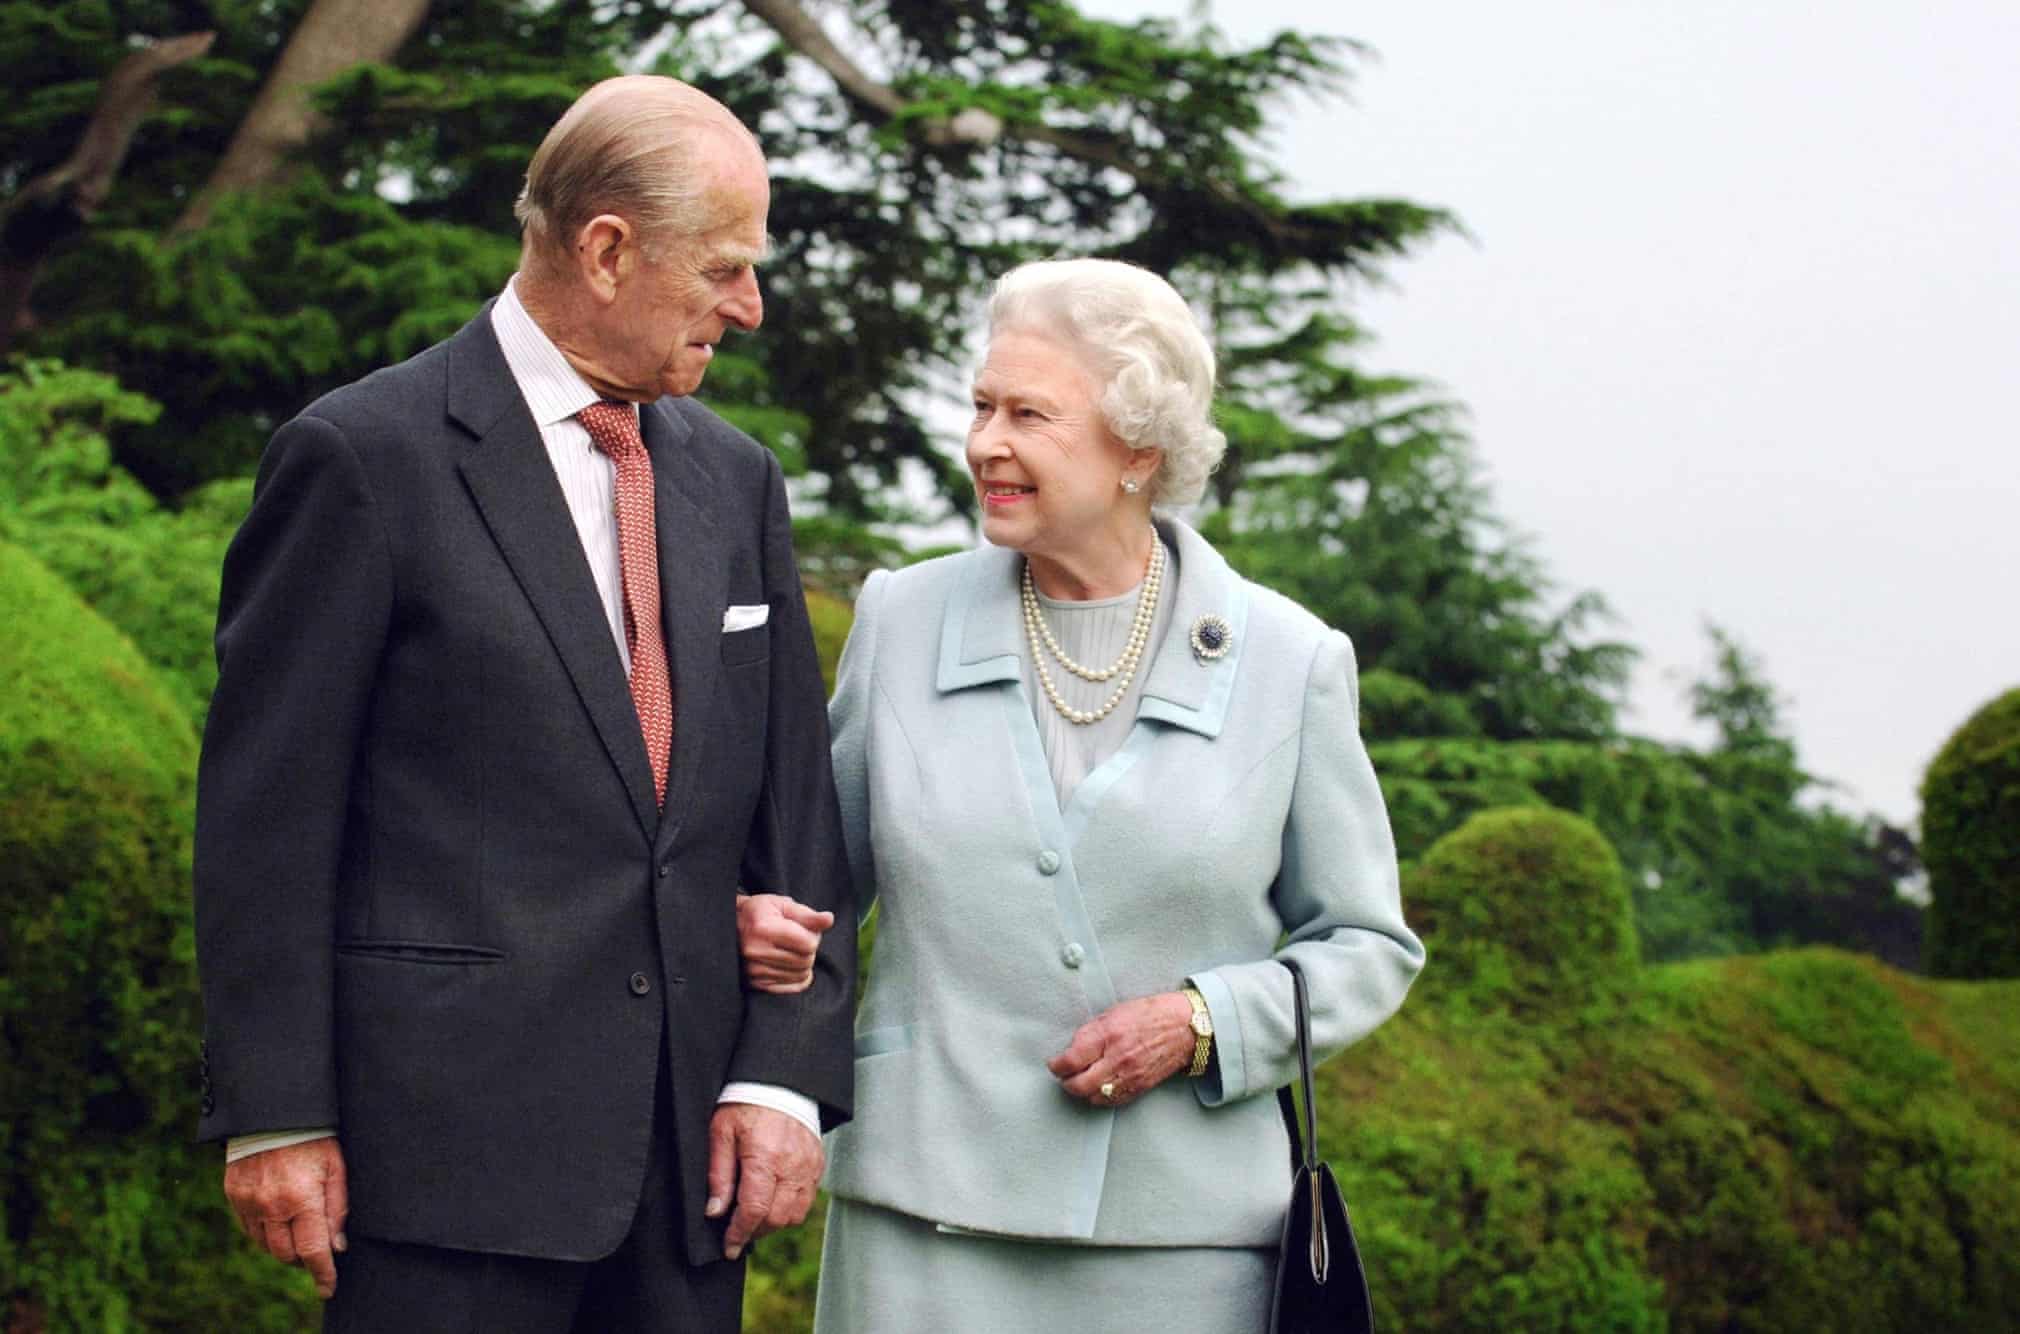 Queen Elizabeth II and the Duke of Edinburgh at Broadlands, November 2007, where they spent their wedding night 60 years earlier. Photograph: Fiona Hanson/PA